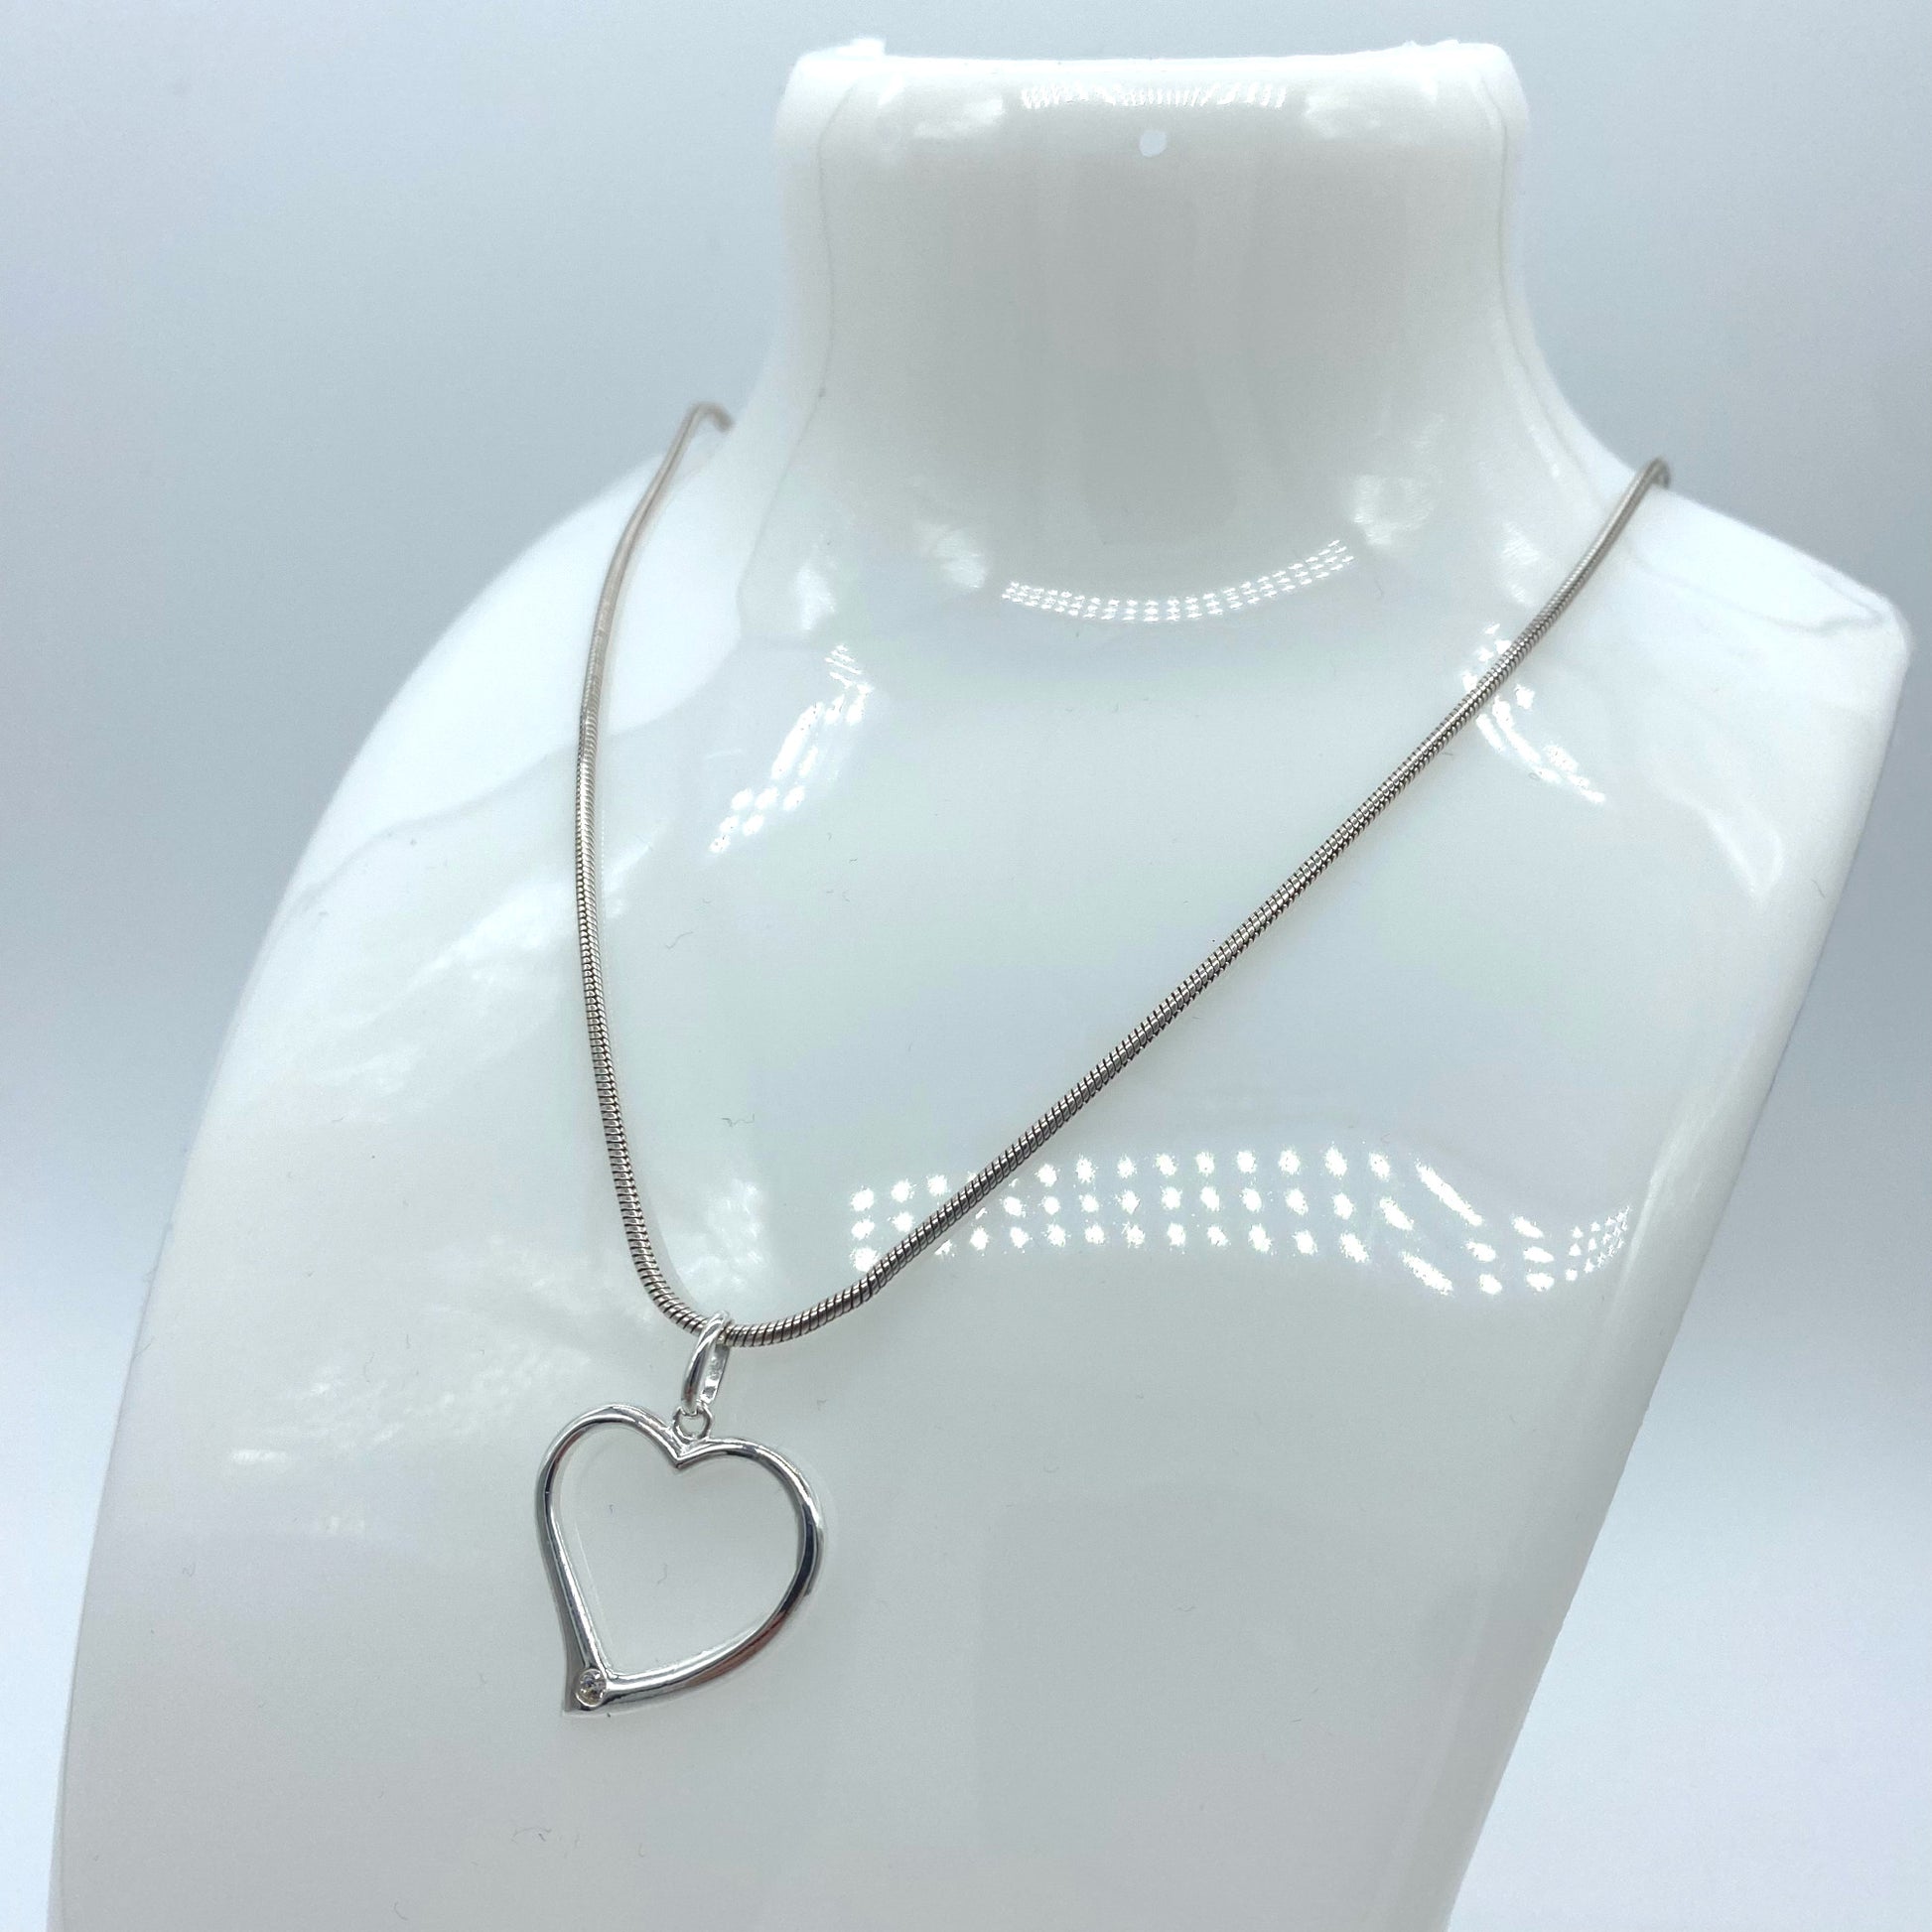 Sterling Silver Necklace with Open Heart Pendant by My Silver Wish